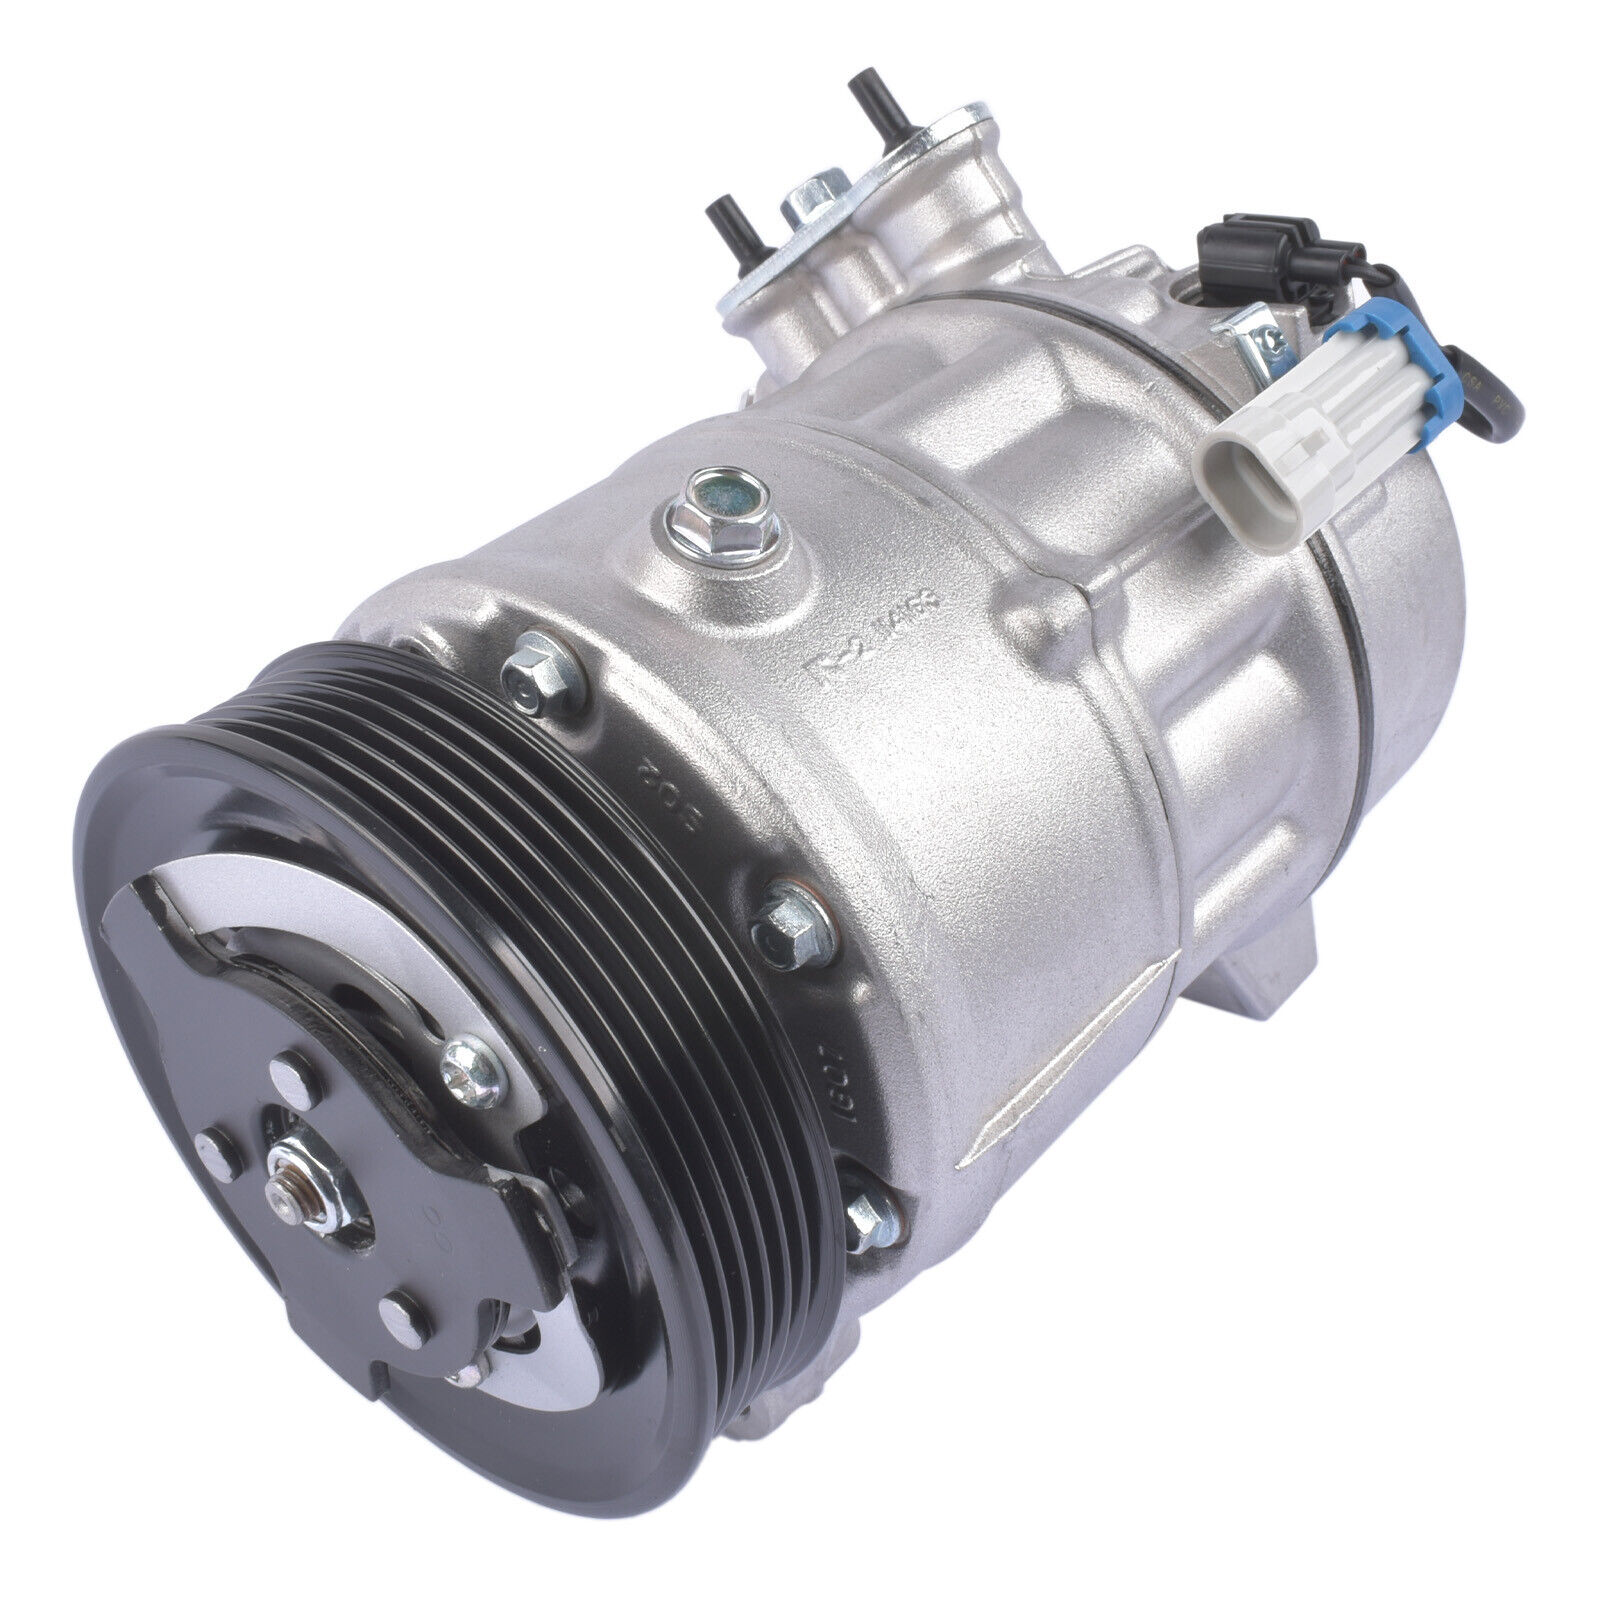 A/C Air Conditioning Compressor for Buick Allure LaCrosse Cadillac SRX 2010-2011